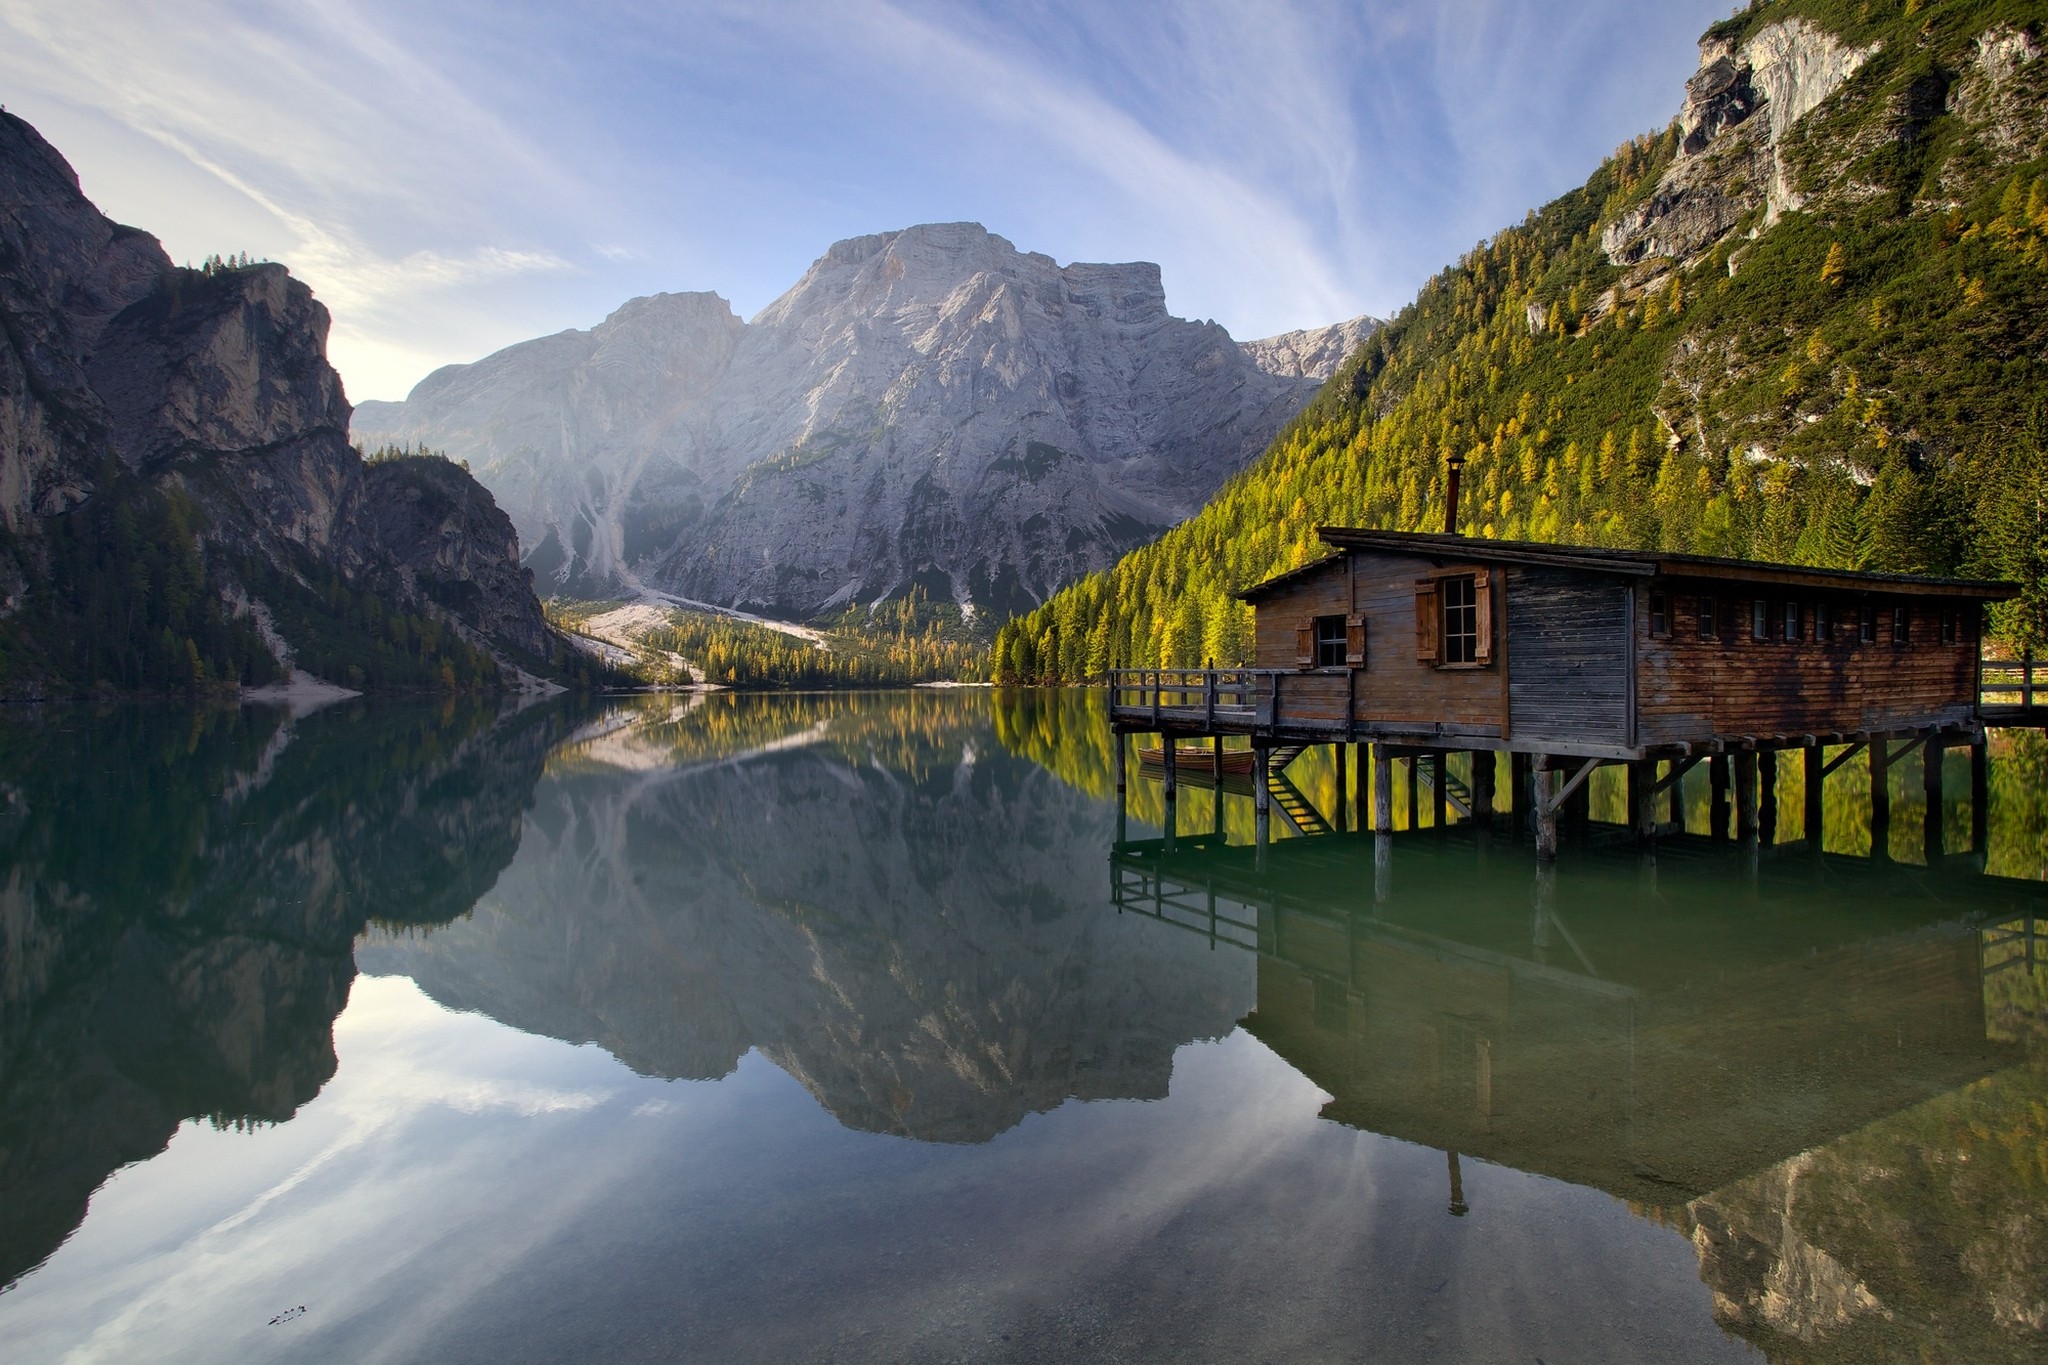 General 2048x1365 nature landscape photography lake mountains water cabin forest reflection Italy Pragser Wildsee